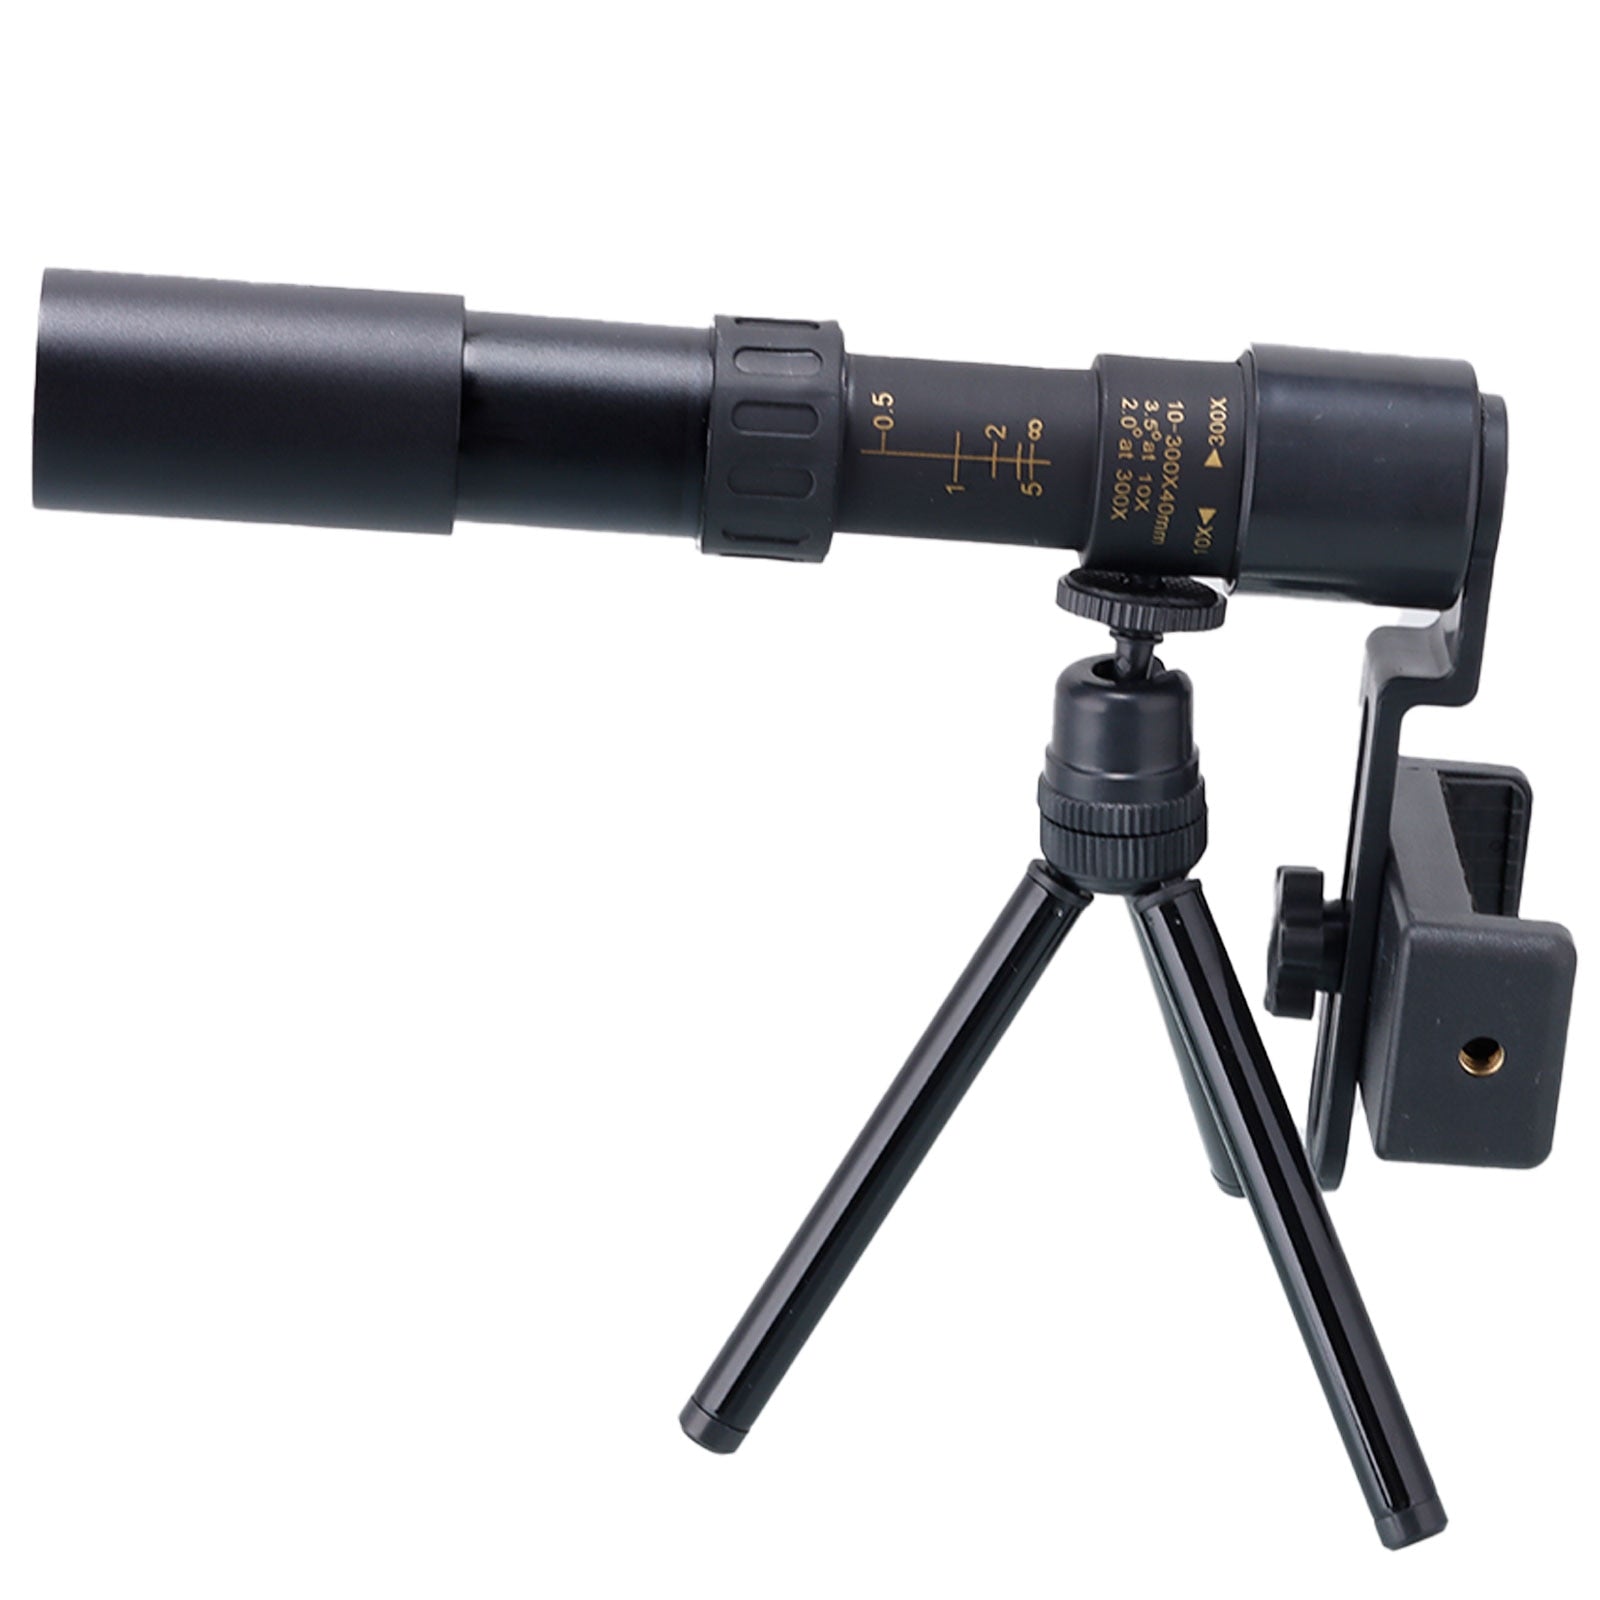 Explore with Precision: ZairaVision 300x40 for Travel, Hunting, Camping